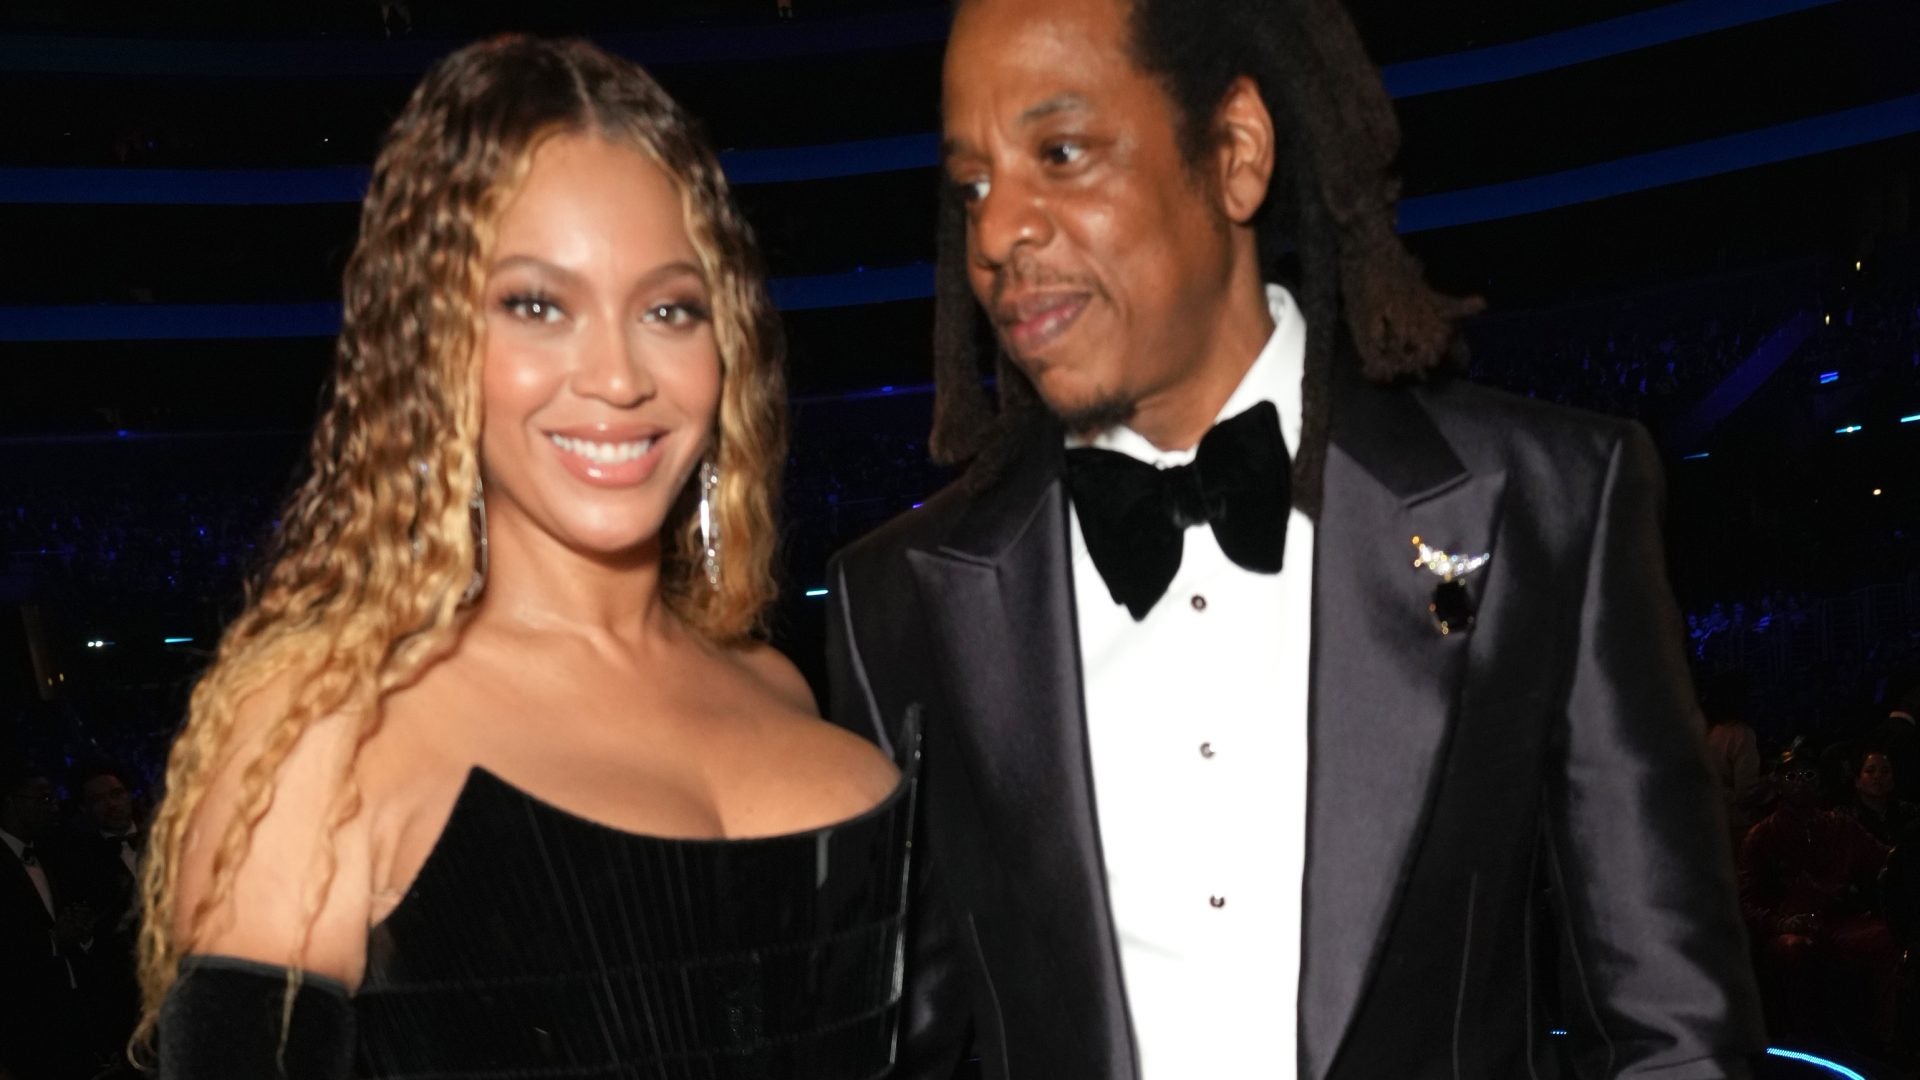 Jay-Z Says Beyoncé Should Have Taken Home The Album Of The Year Grammy: "[RENAISSANCE] Has Inspired The World"